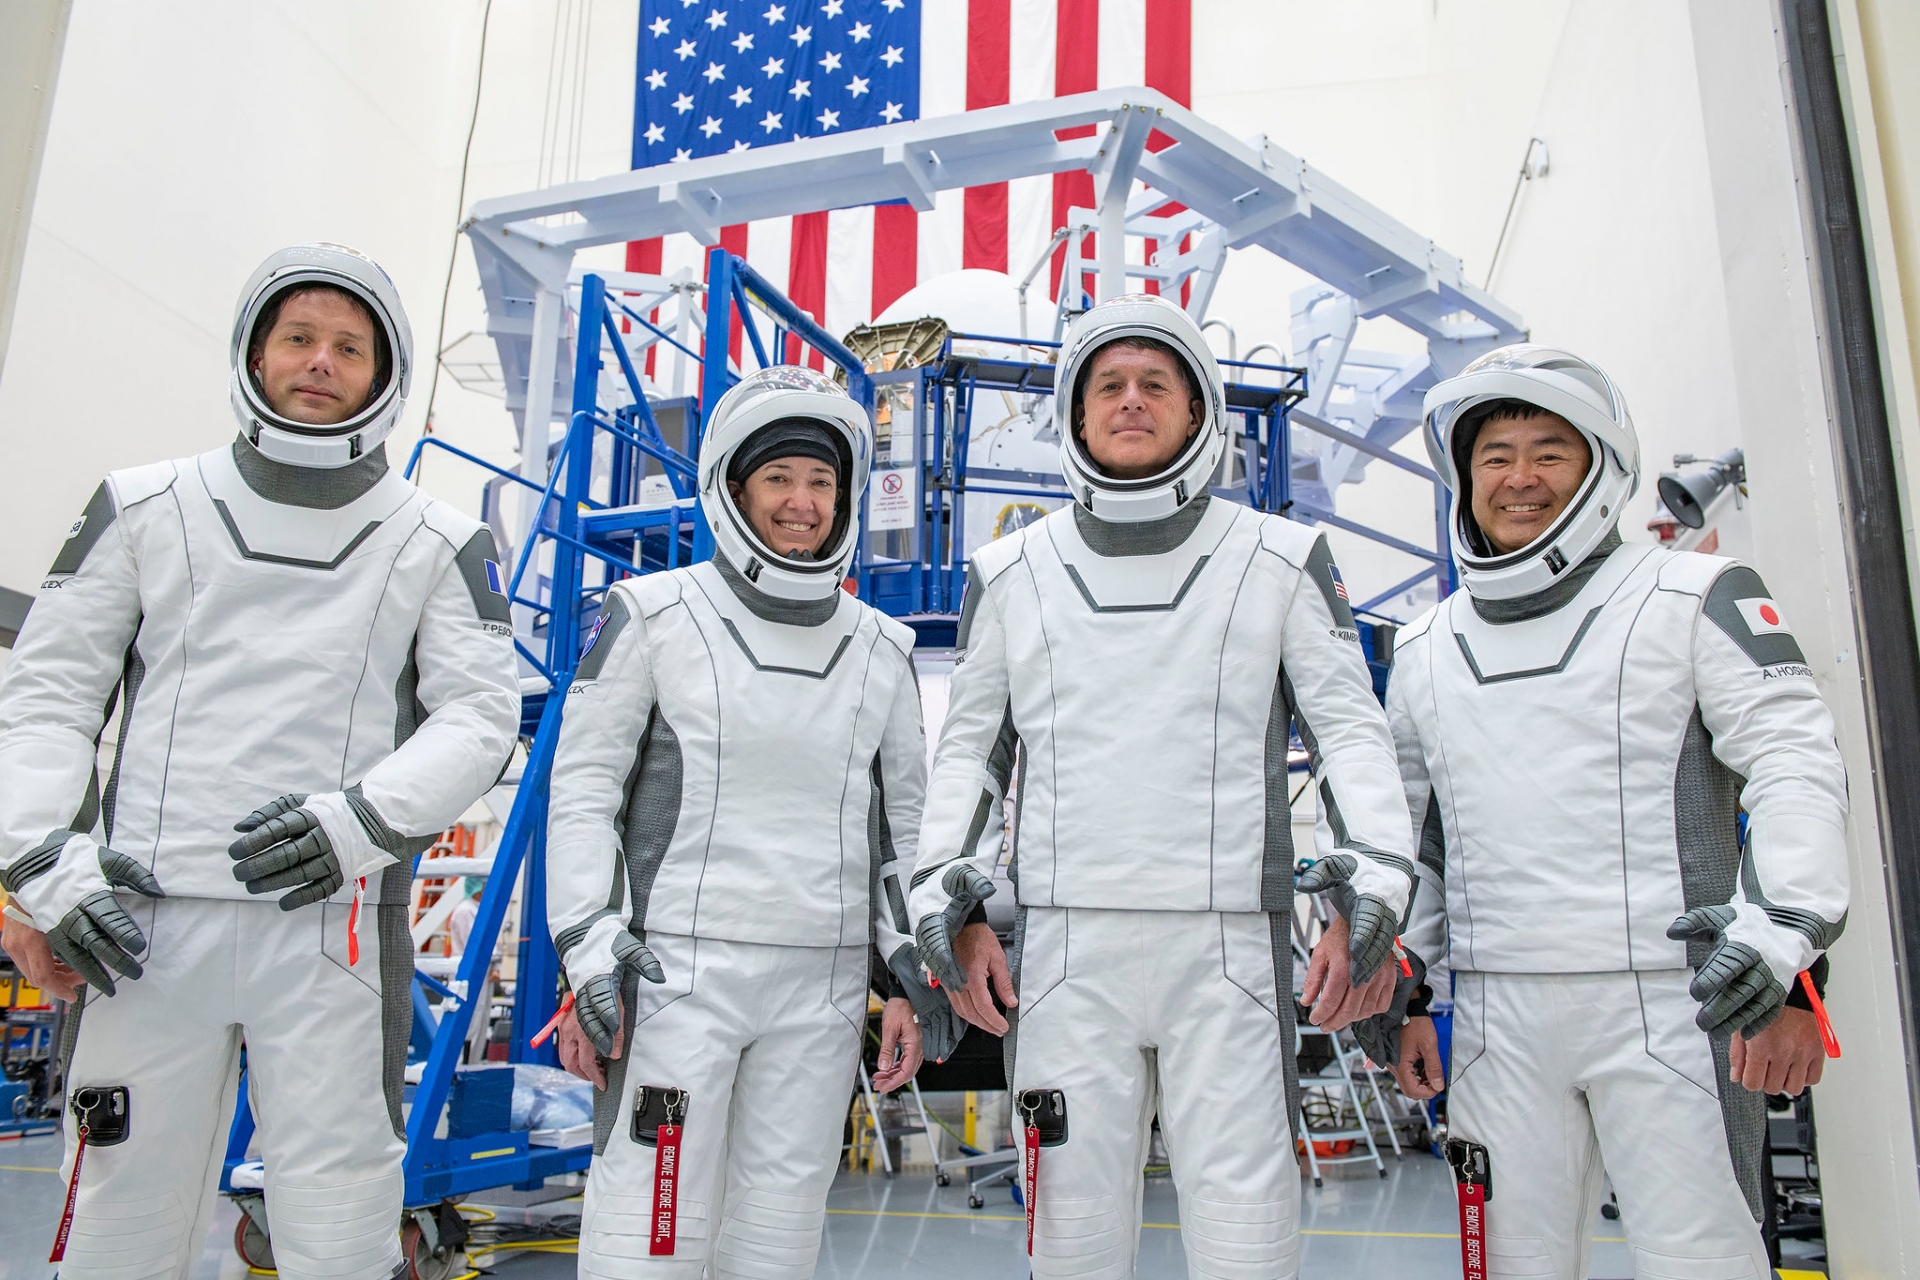 The crew for the second long-duration SpaceX Crew Dragon mission to the International Space Station, NASA’s SpaceX Crew-2, are pictured during a training session at the SpaceX training facility in Hawthorne, California. From left are, Mission Specialist T